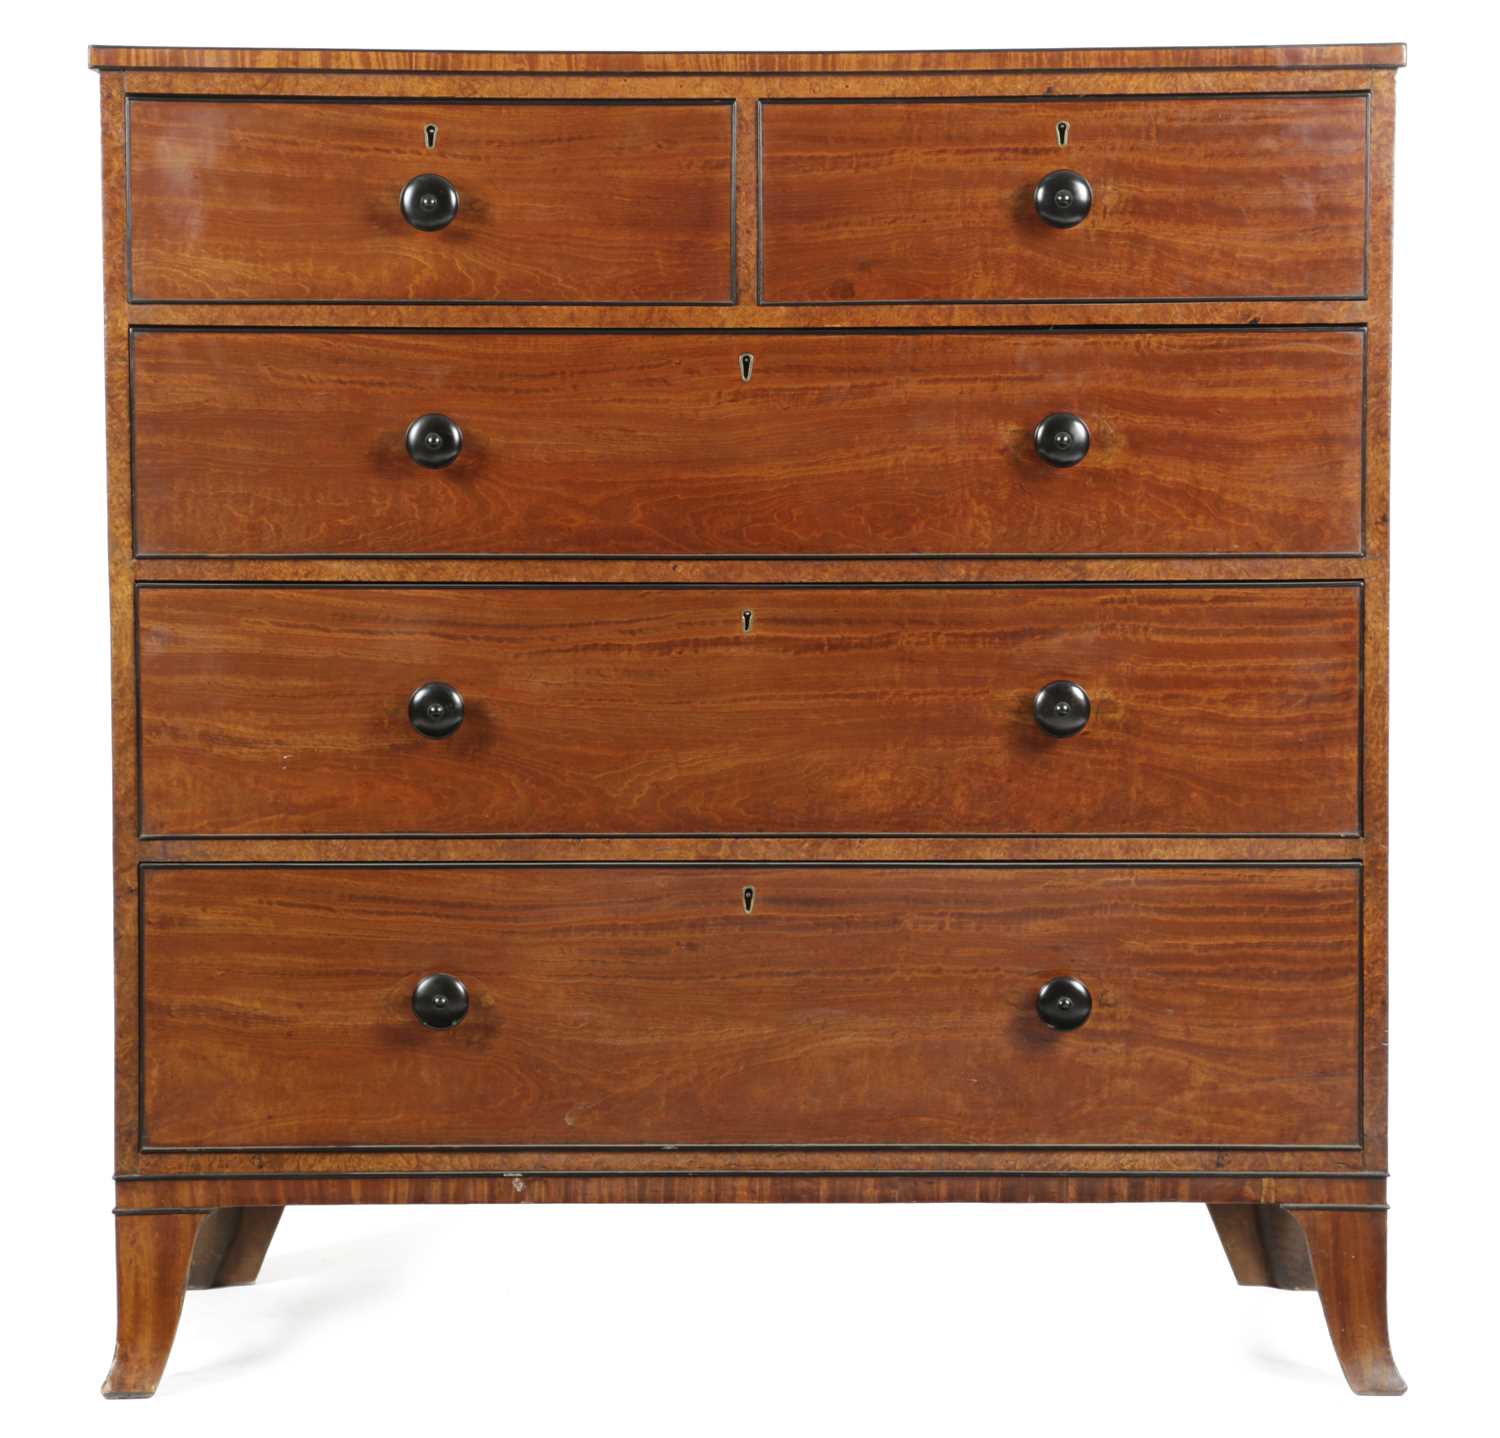 A REGENCY SATINWOOD CHEST IN THE MANNER OF GILLOWS, 19TH CENTURY with ebony edging and fitted with